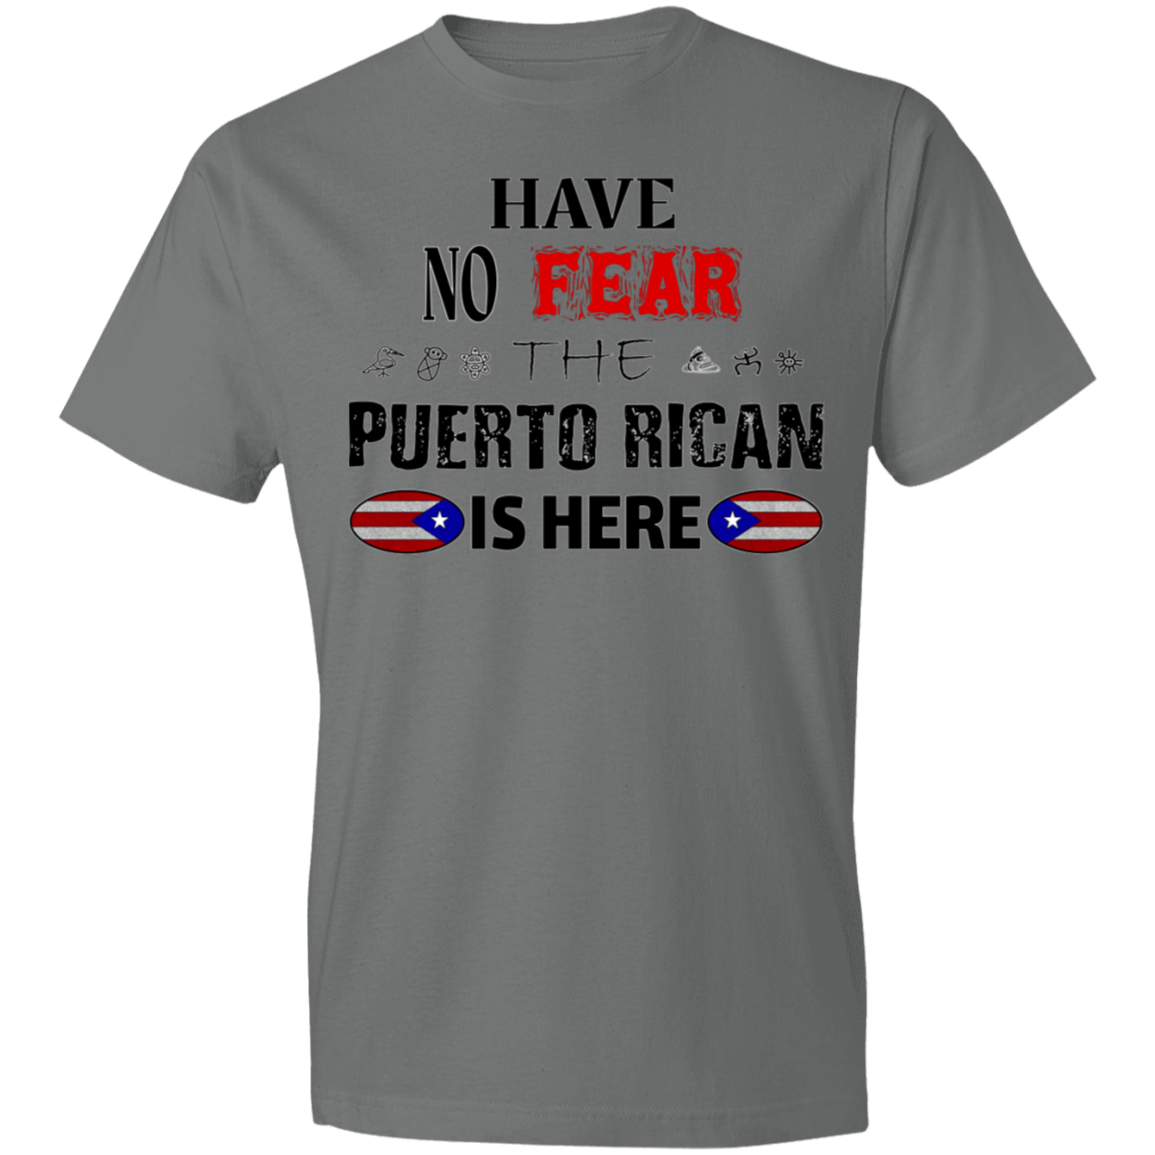 Have No Fear Lightweight T-Shirt 4.5 oz - Puerto Rican Pride